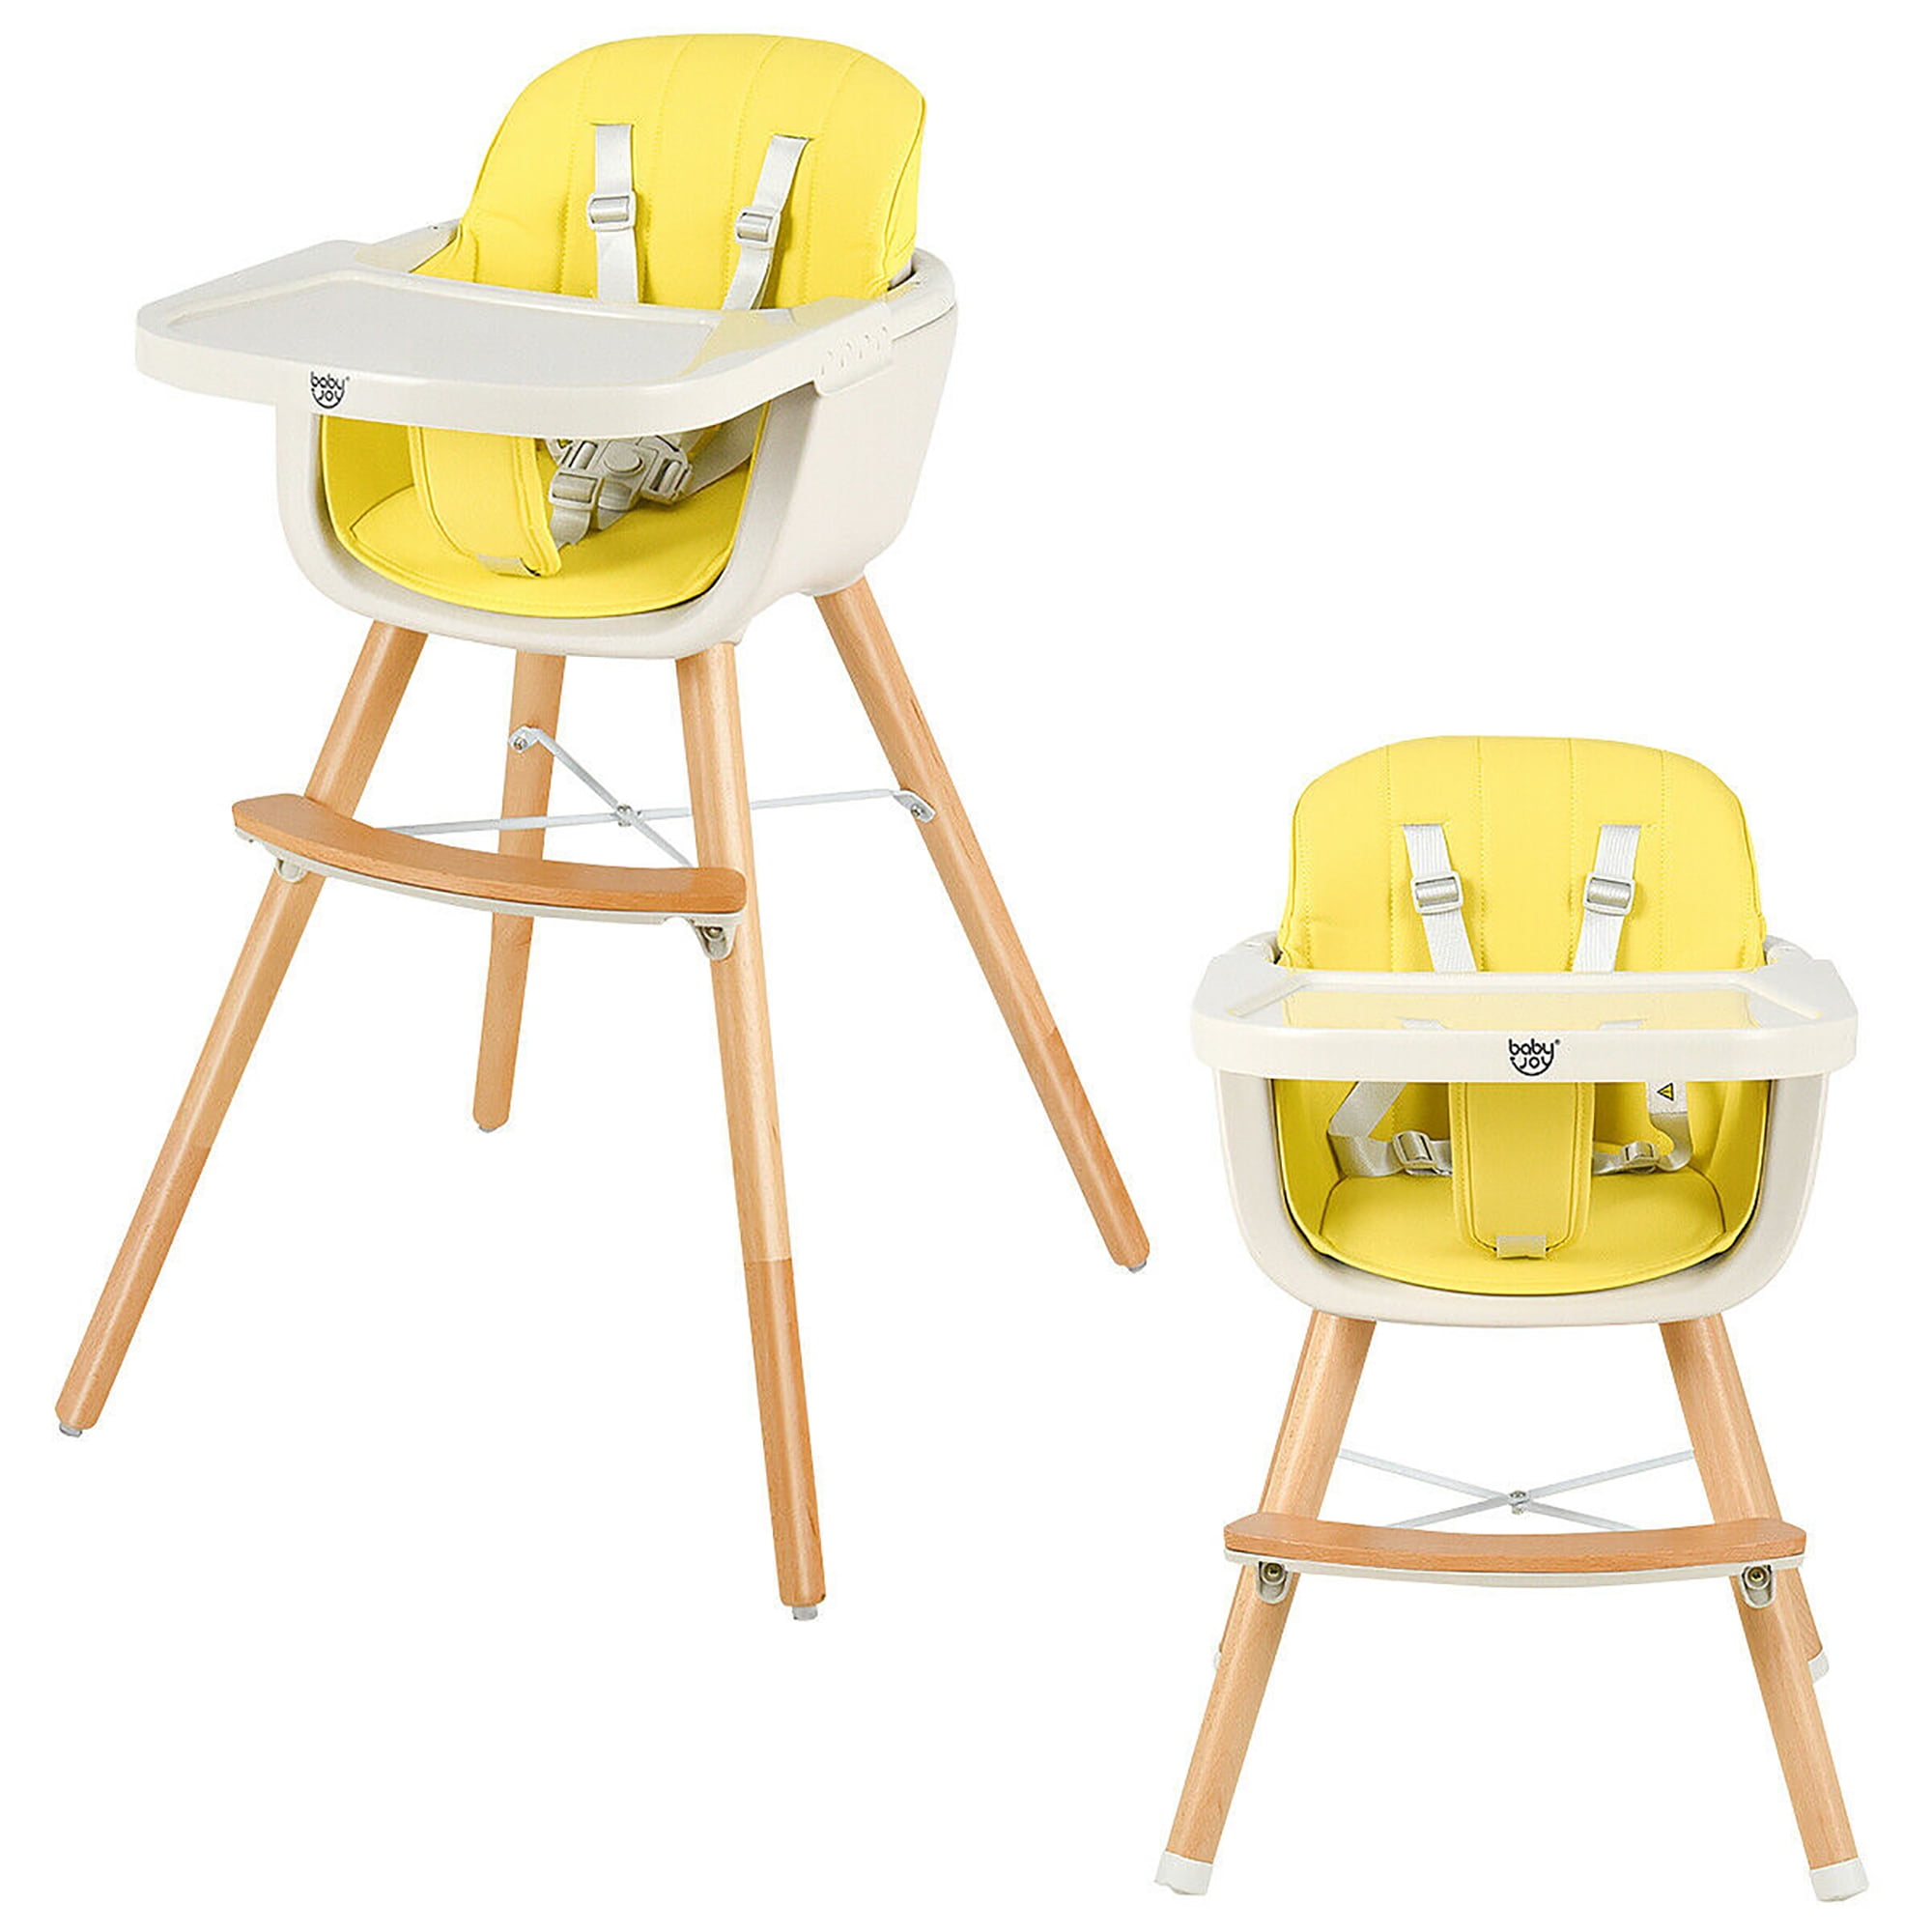 Baby High Chair,2 in 1 Baby Wooden Highchair Feeding Chair and Table Set Solid Detachable Highchair Children Highchair Safety Seat with Adjustable Tray for 4 Year Old Baby,18.31 x 15.63 x 32.68inch